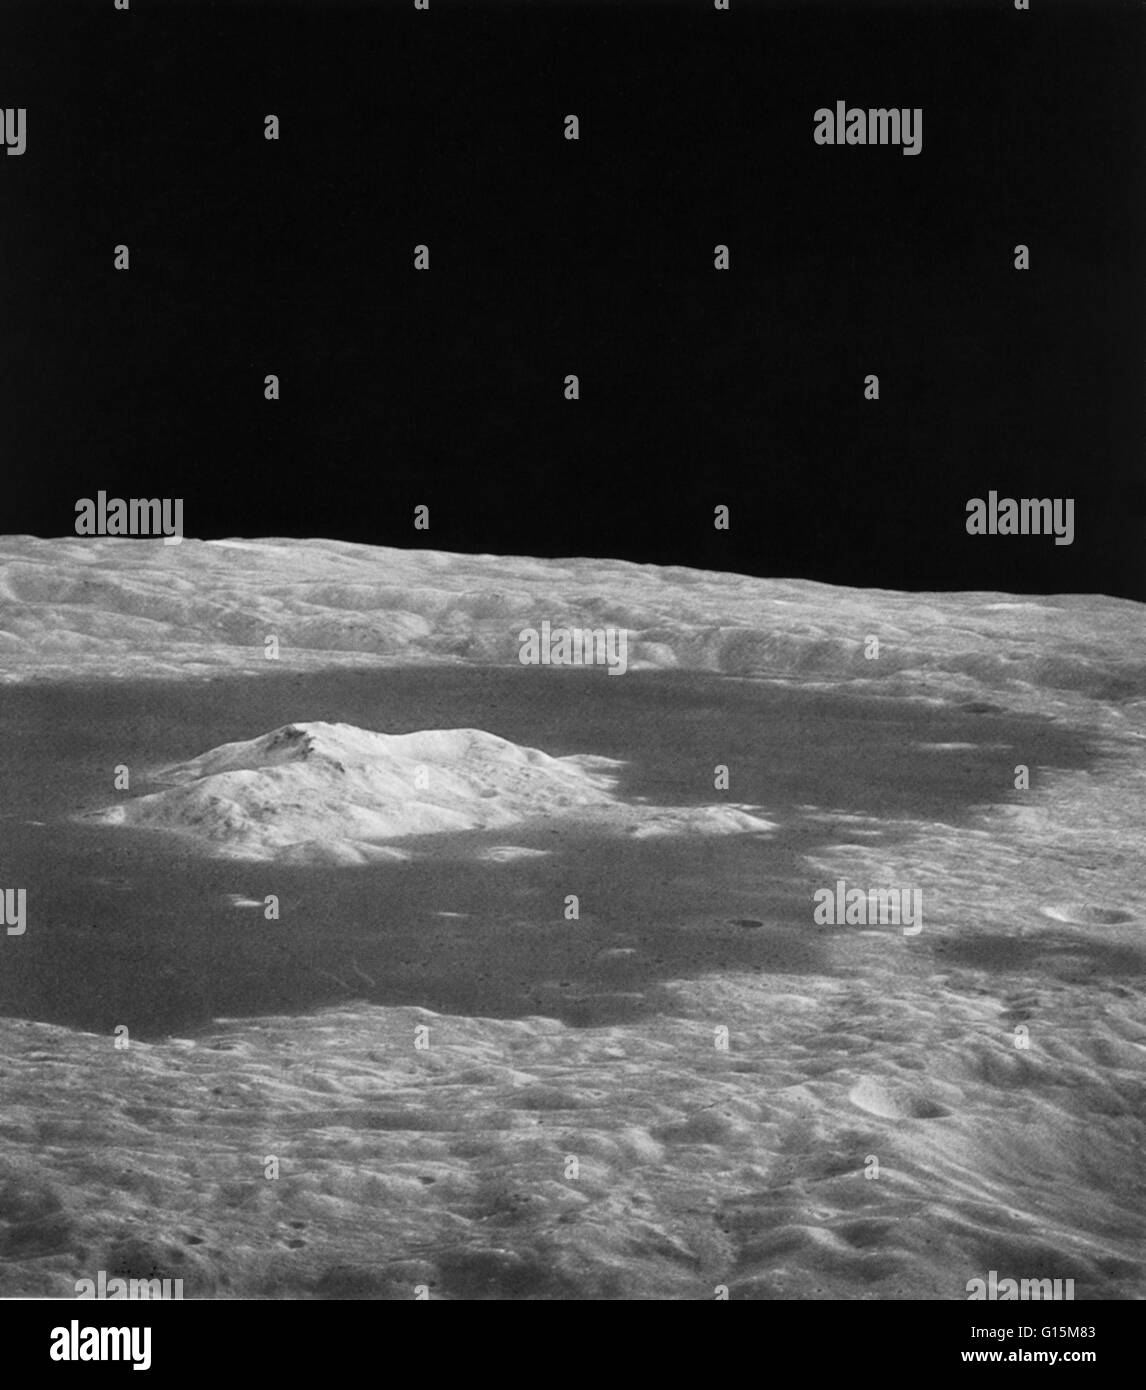 Crater Tsiolkovsky on the Moon, taken from Apollo 15. The mission began on July 26, 1971, and concluded on August 7. Stock Photo